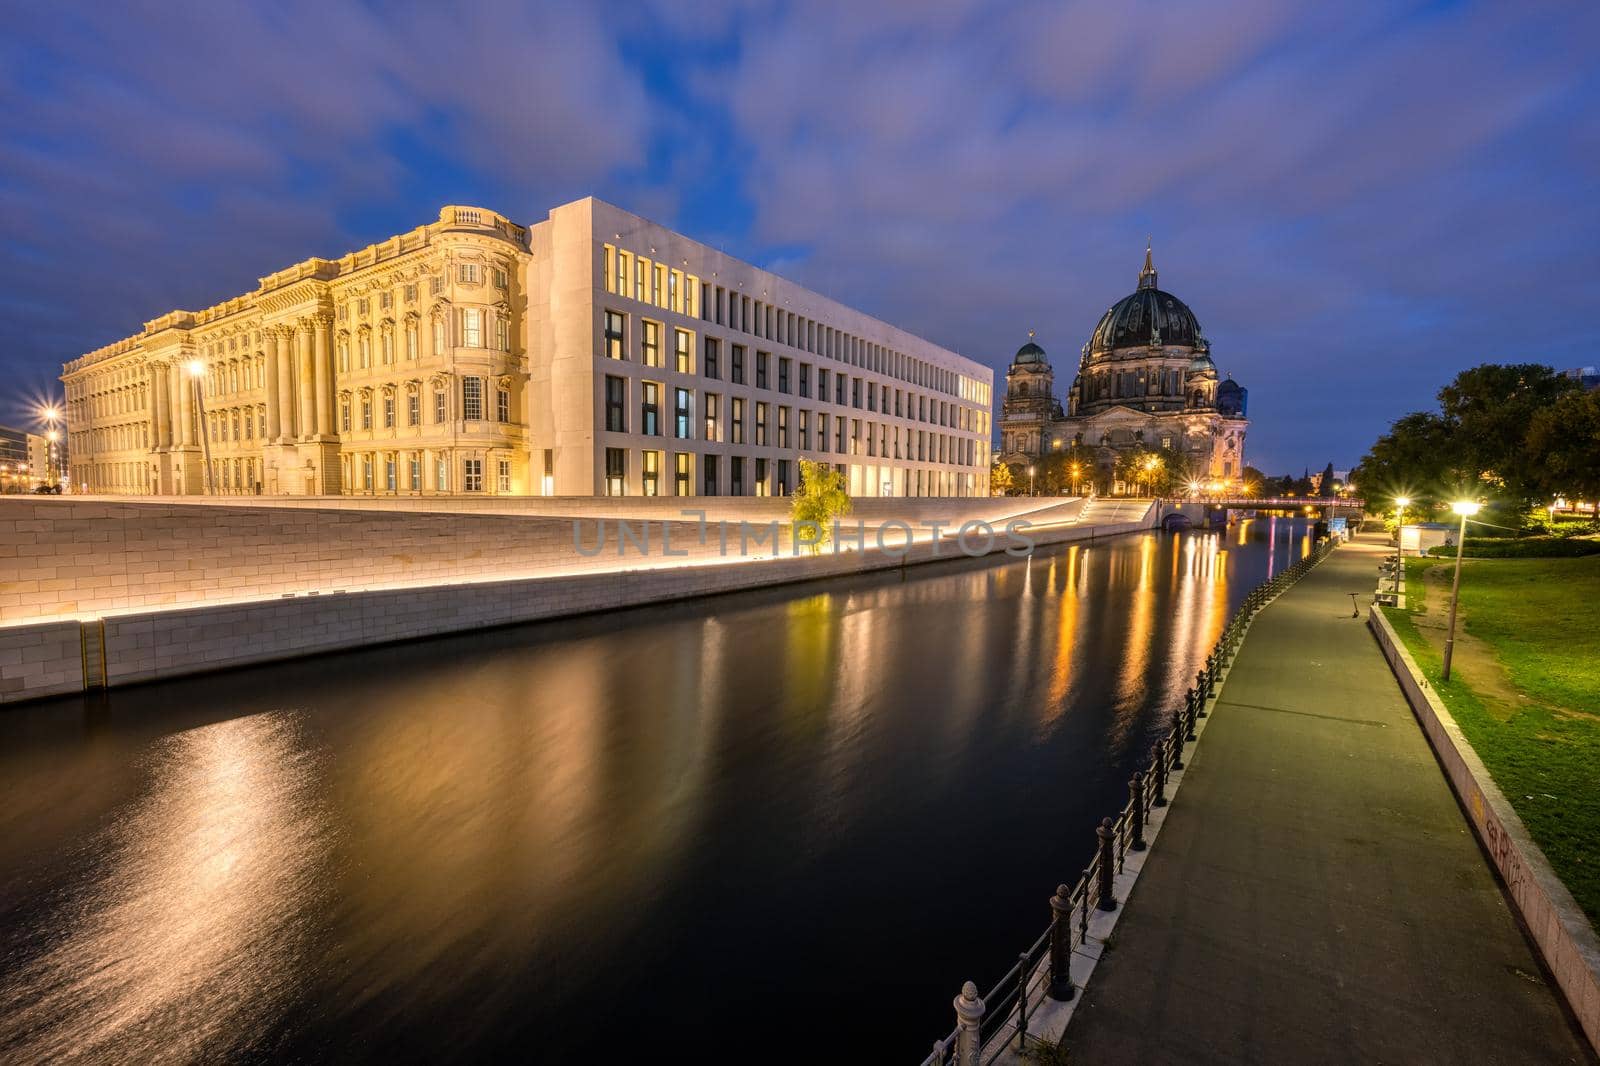 The Berlin Cathedral and the rebuilt City Palace on the banks of the Spree at dawn